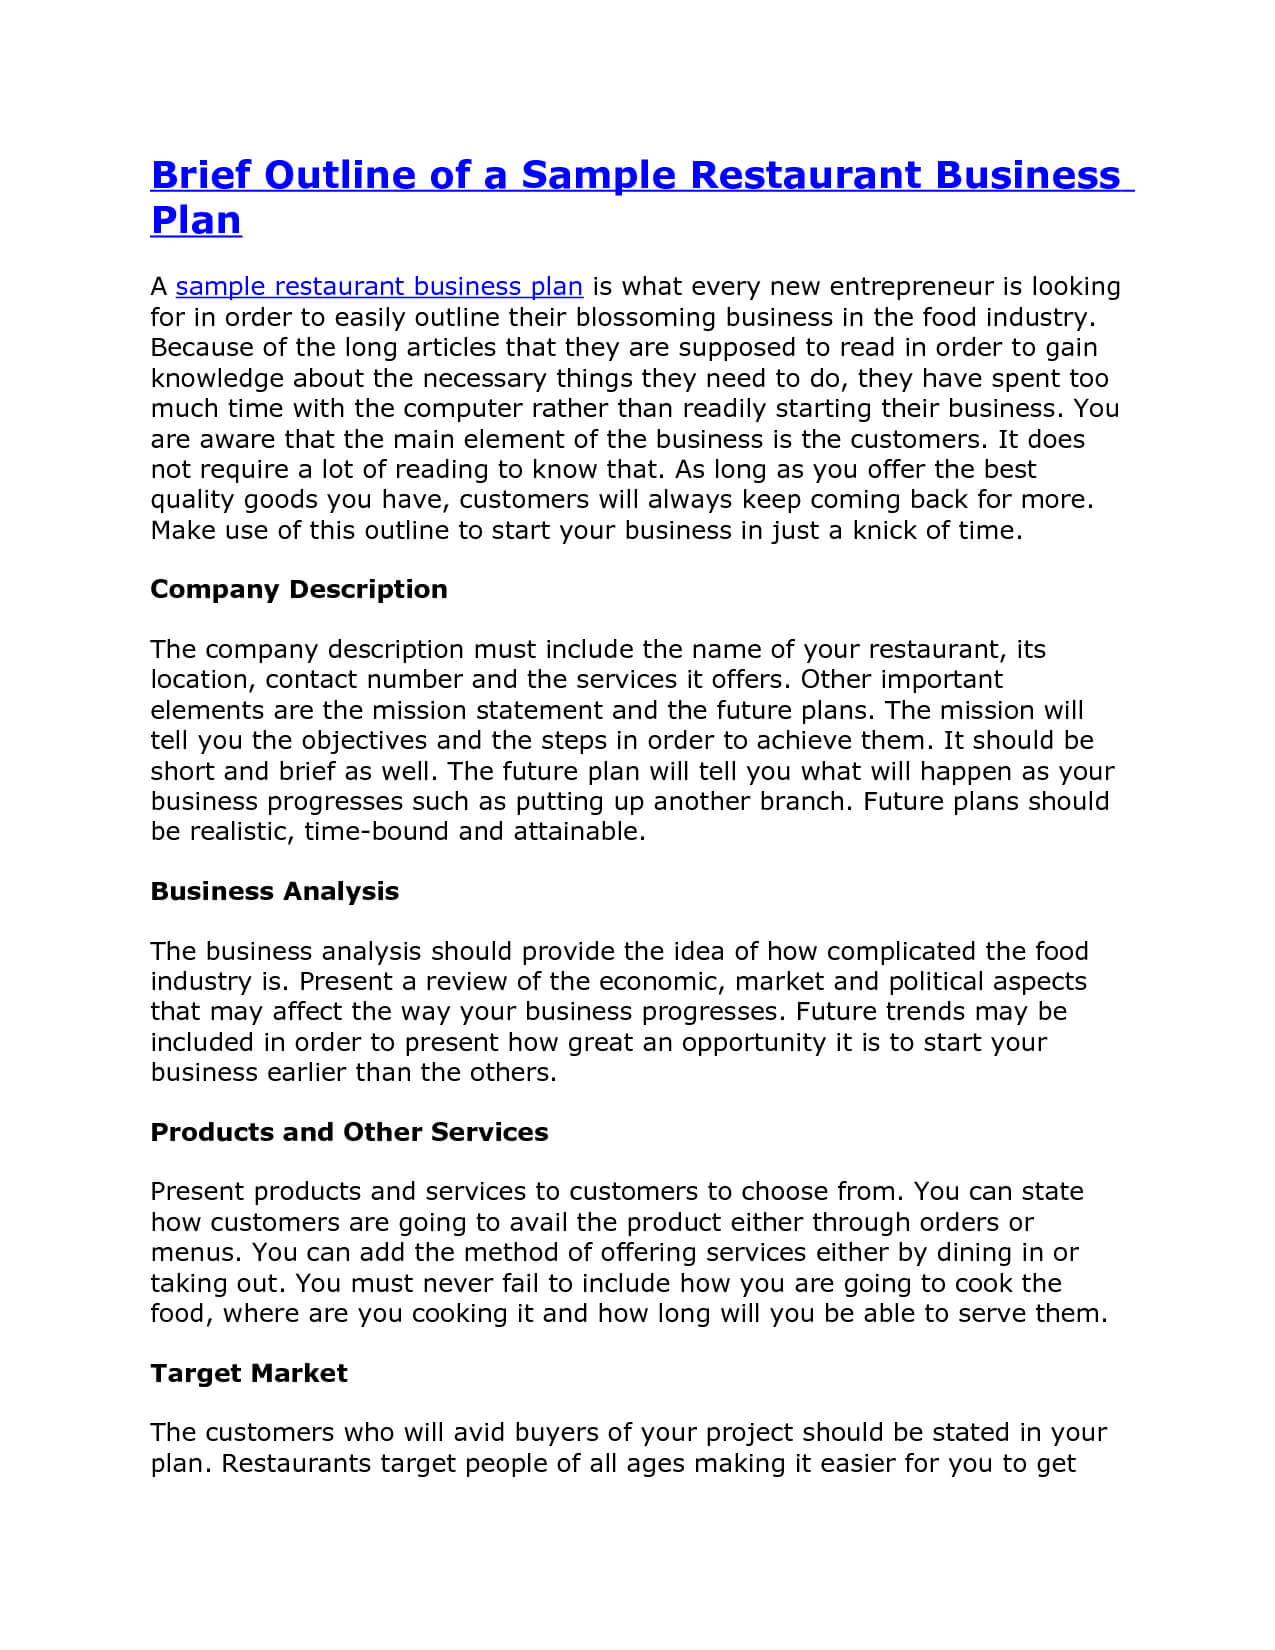 Business Plans Plan Format Sinhala Pdf Sample For Fast Food For Business Analysis Proposal Template